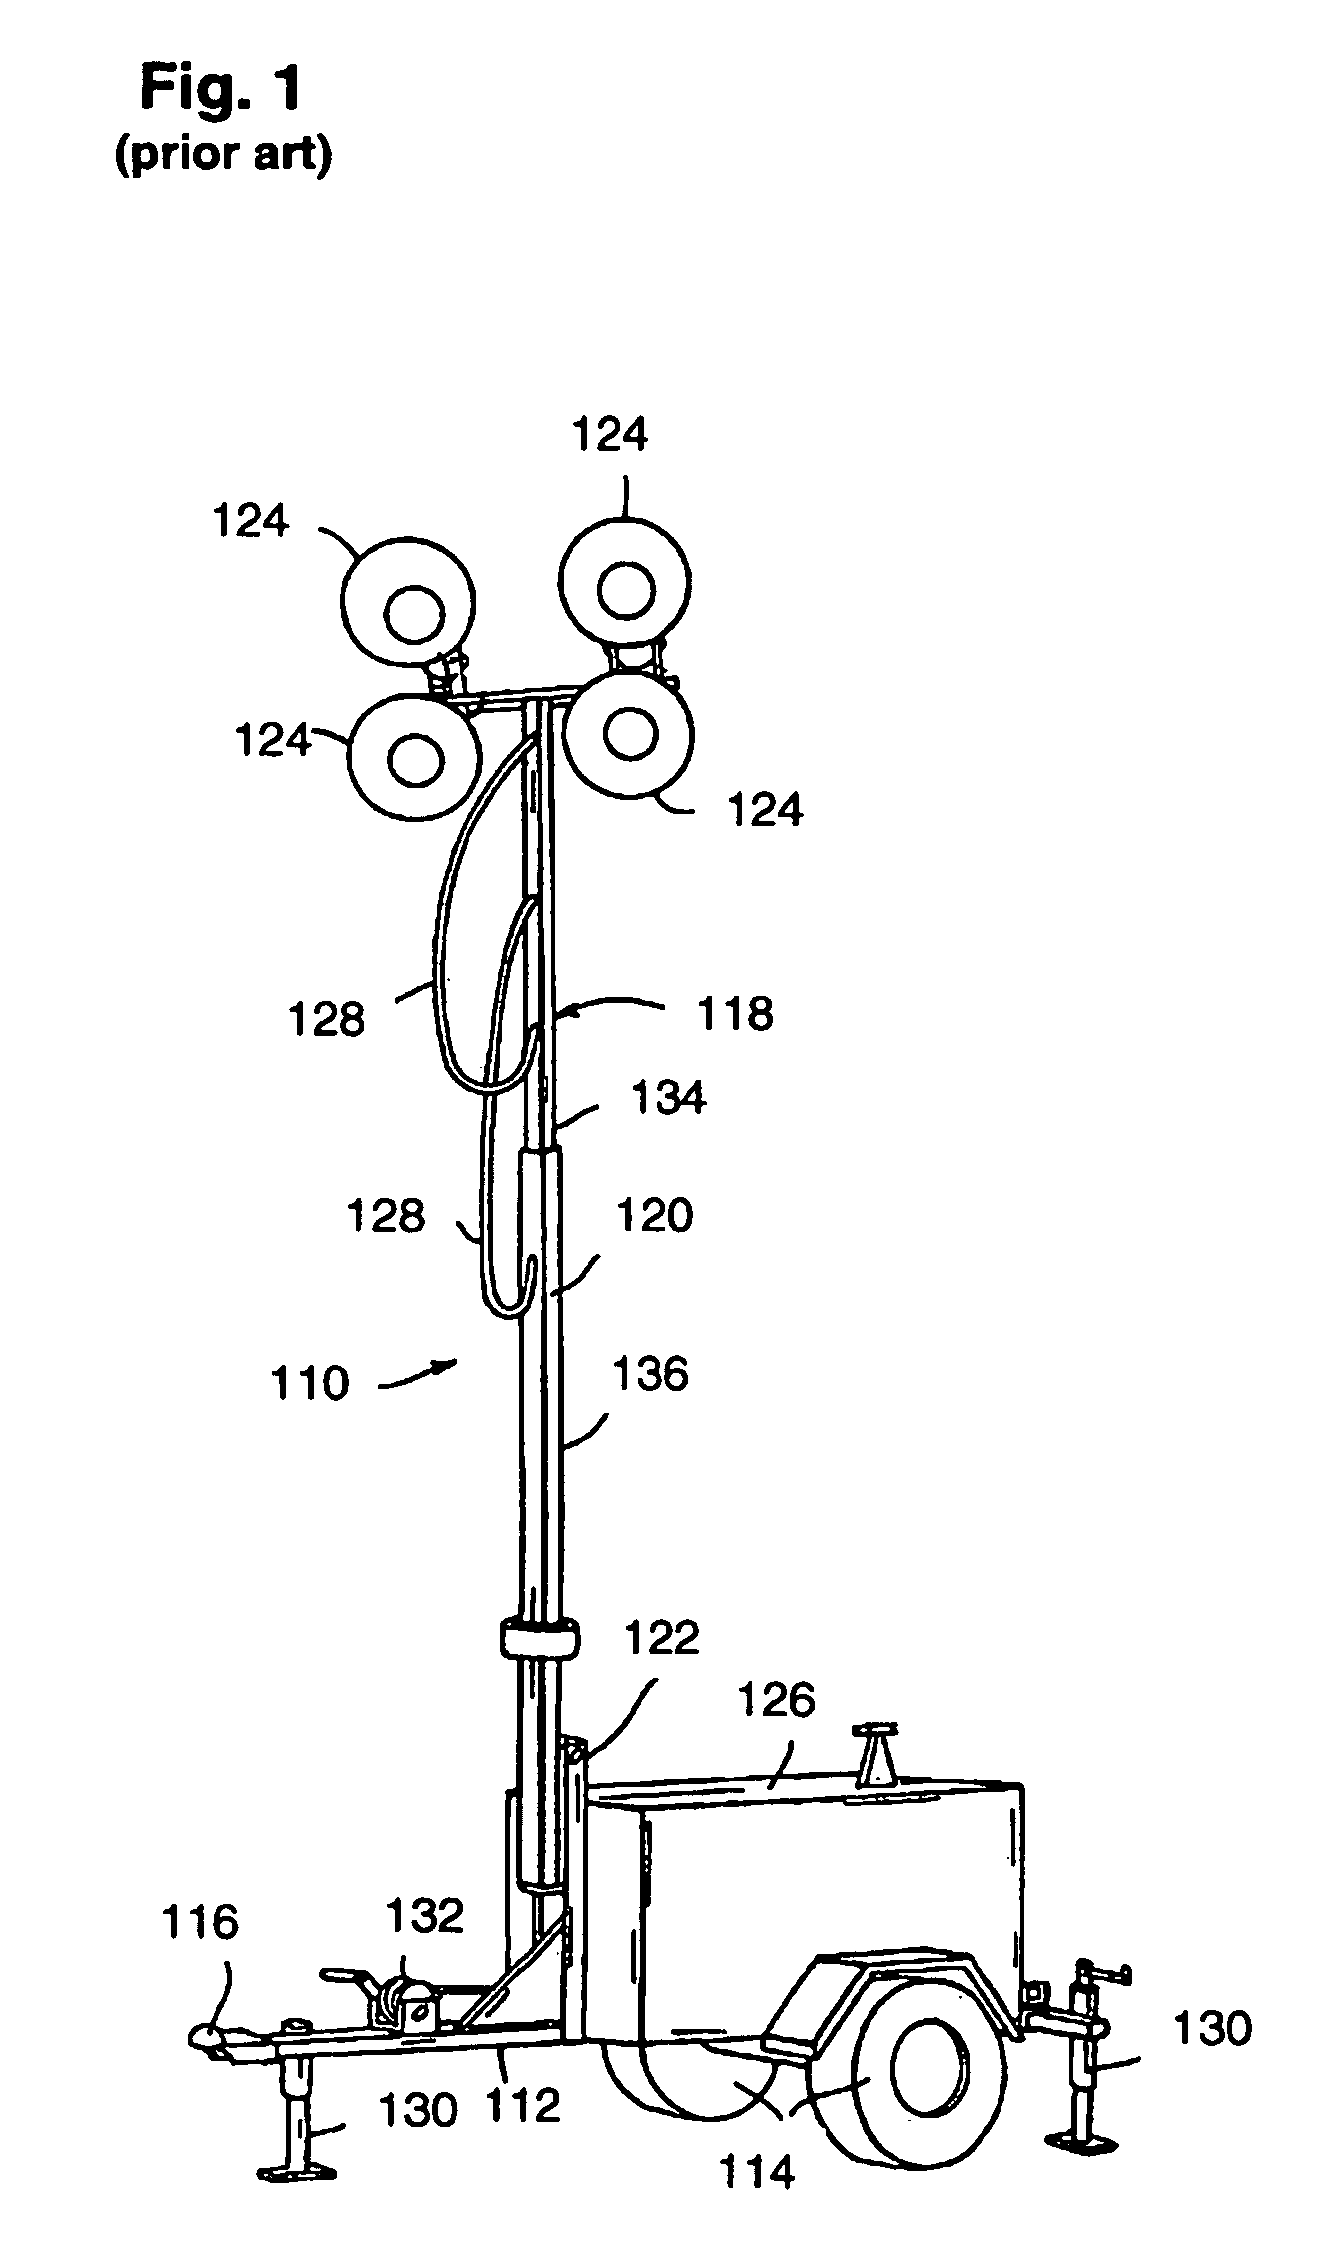 High-intensity discharge lighting system and alternator power supply